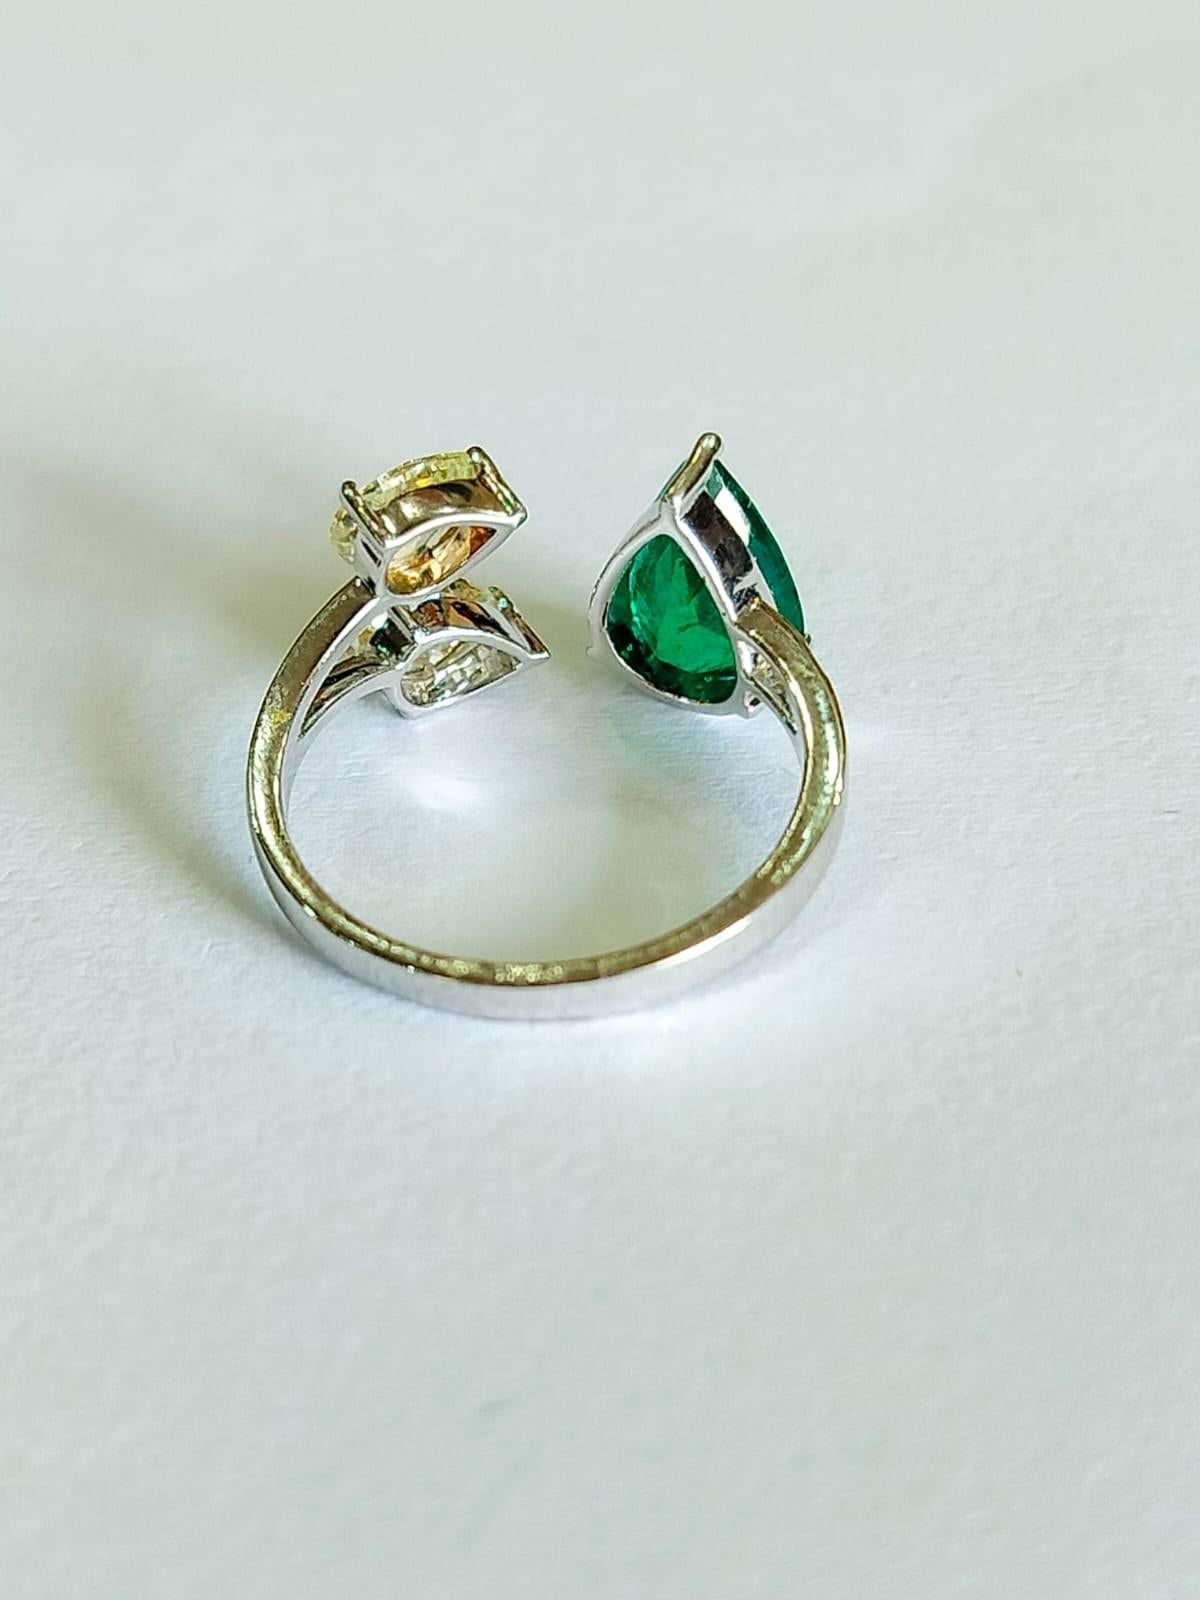 Modern Set in 18K Gold, 1.46 carats, natural Zambian Emerald & Diamond Engagement Ring  For Sale